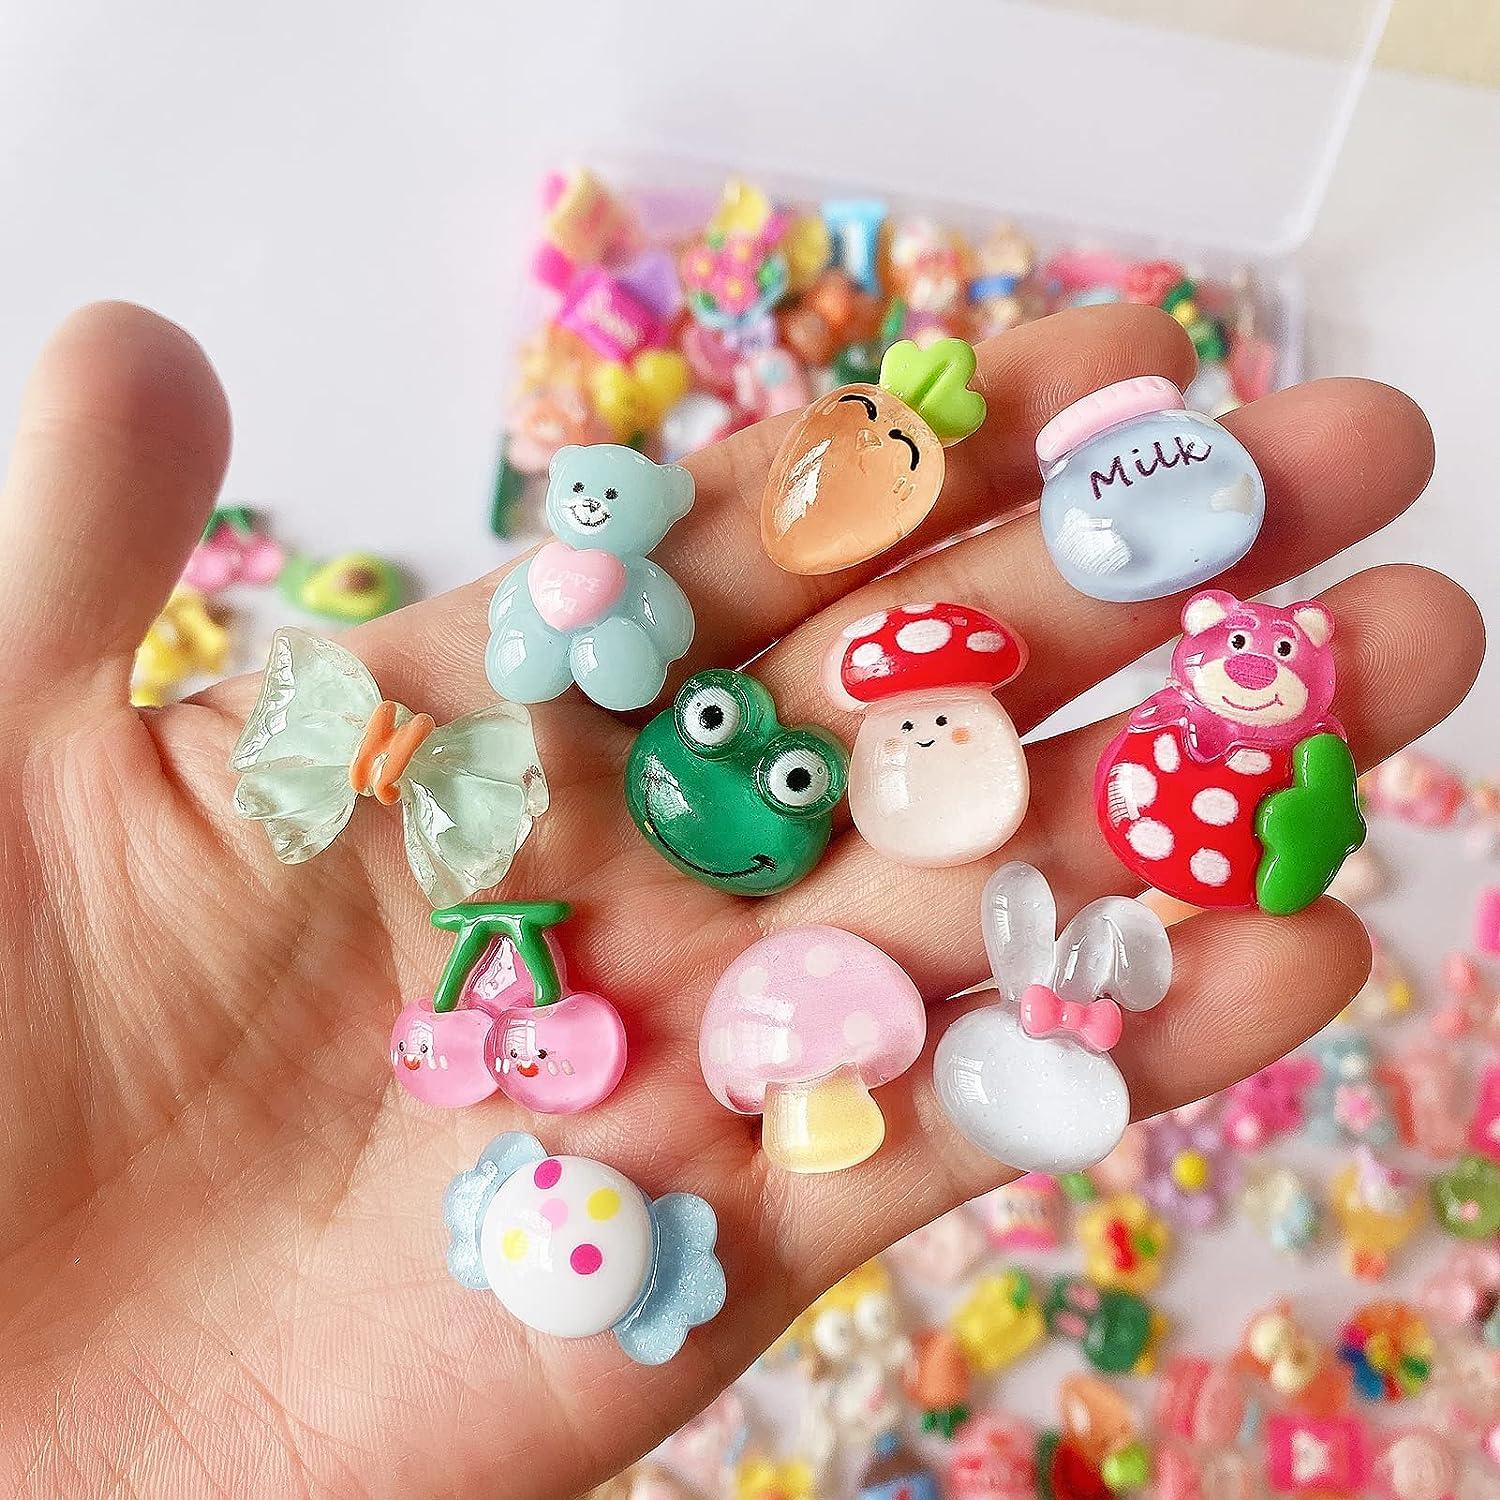 FZFLZDH 60Pieces of Slime Charm Cute Set Resin Charm Mixed